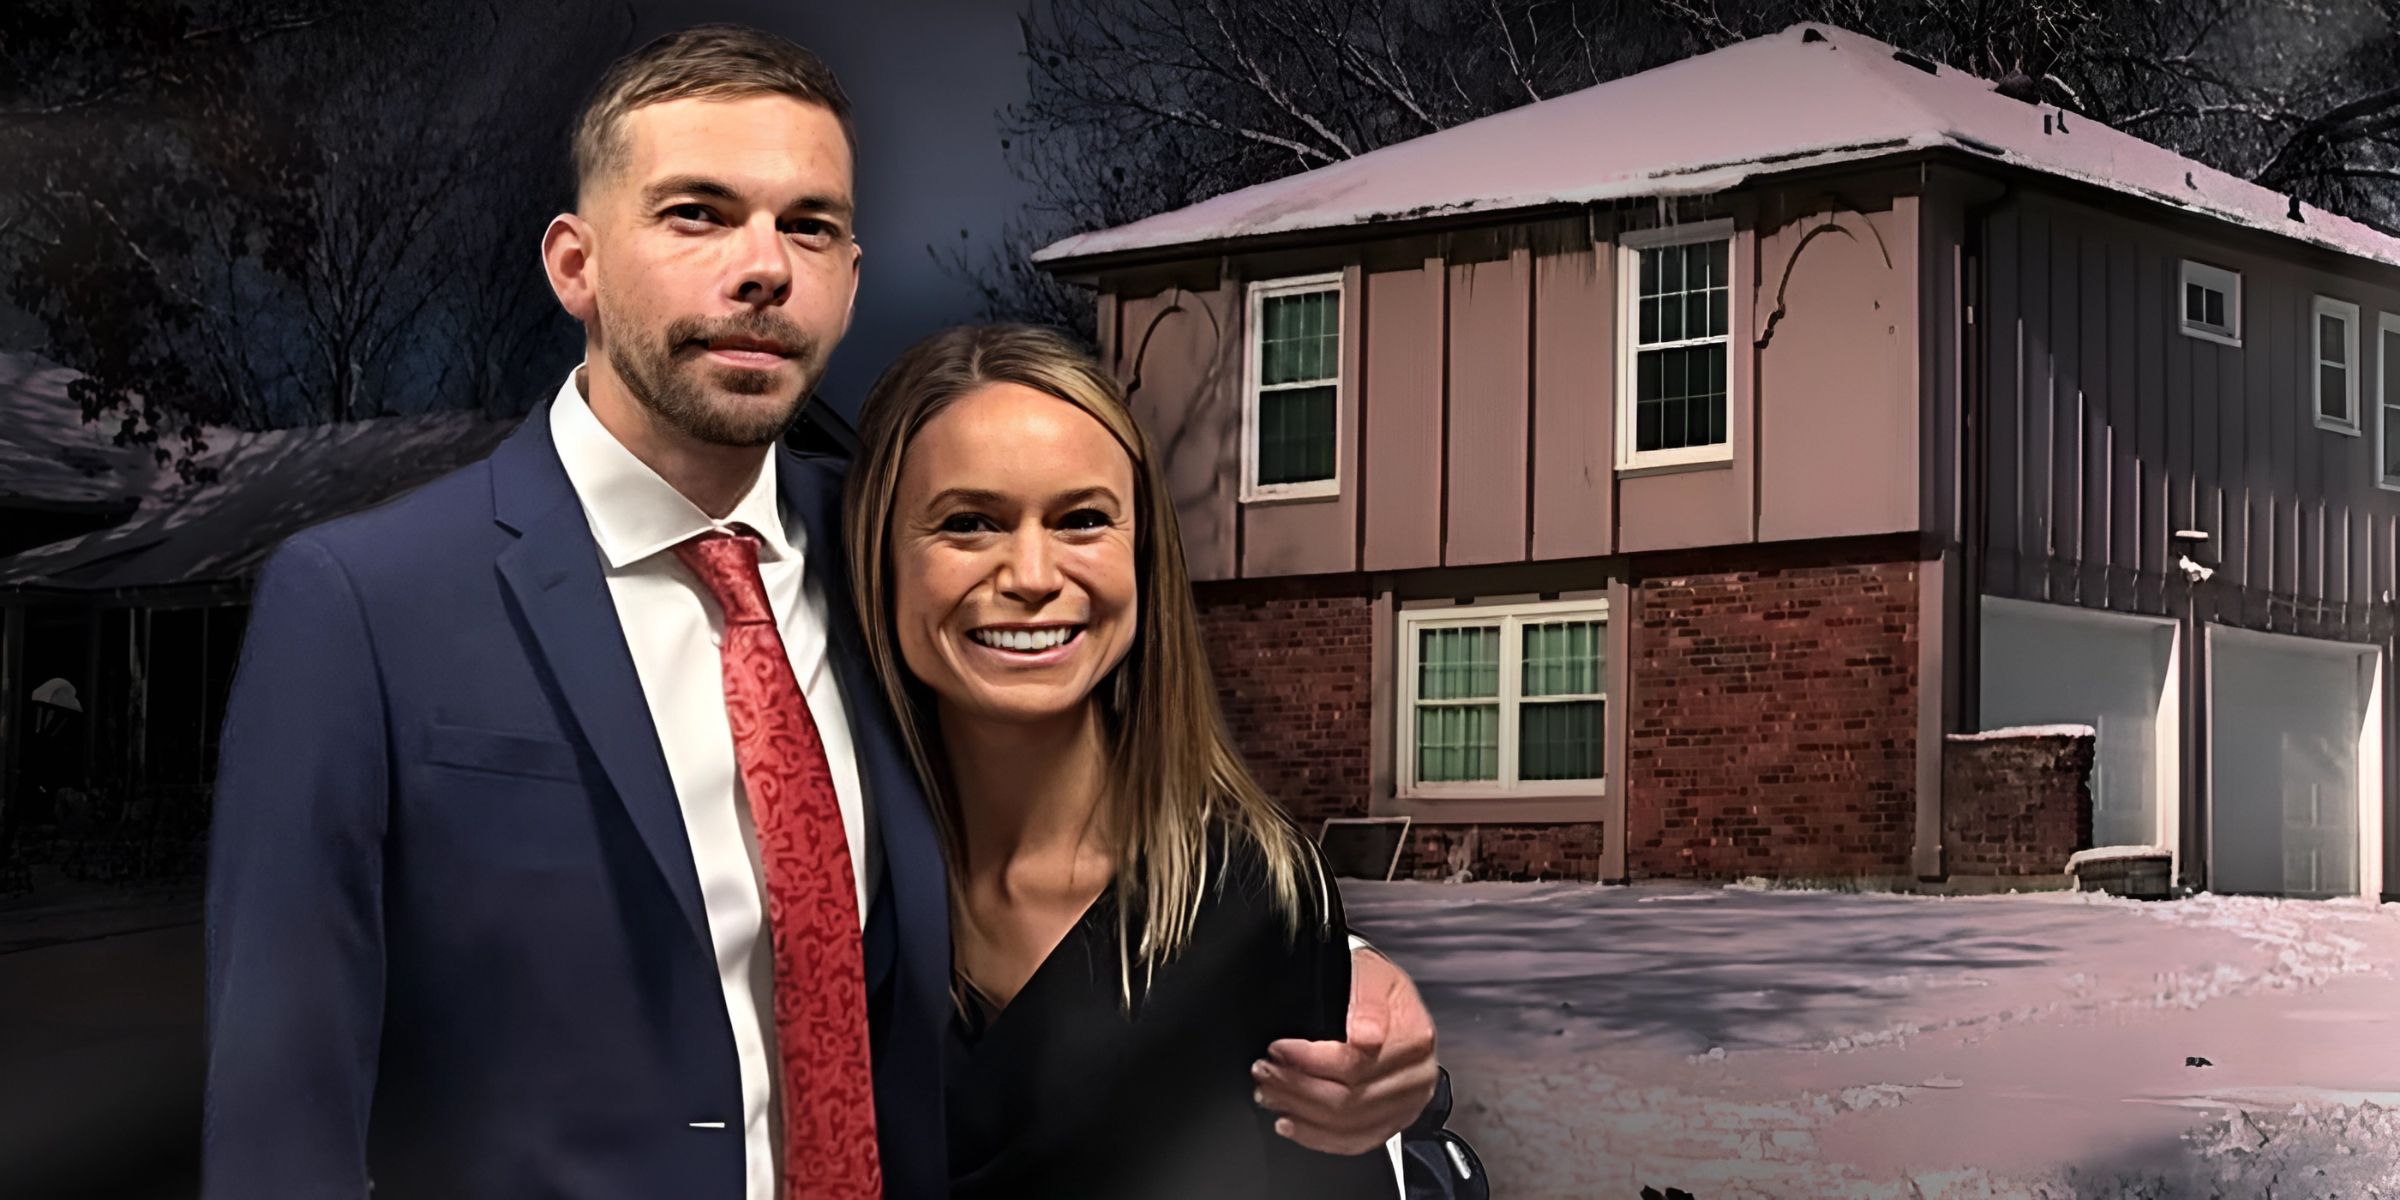 Clayton McGeeney and his fiancée. | The house where his body was found. | Sources: Facebook/Clayton McGeeney | YouTube/fox4kc